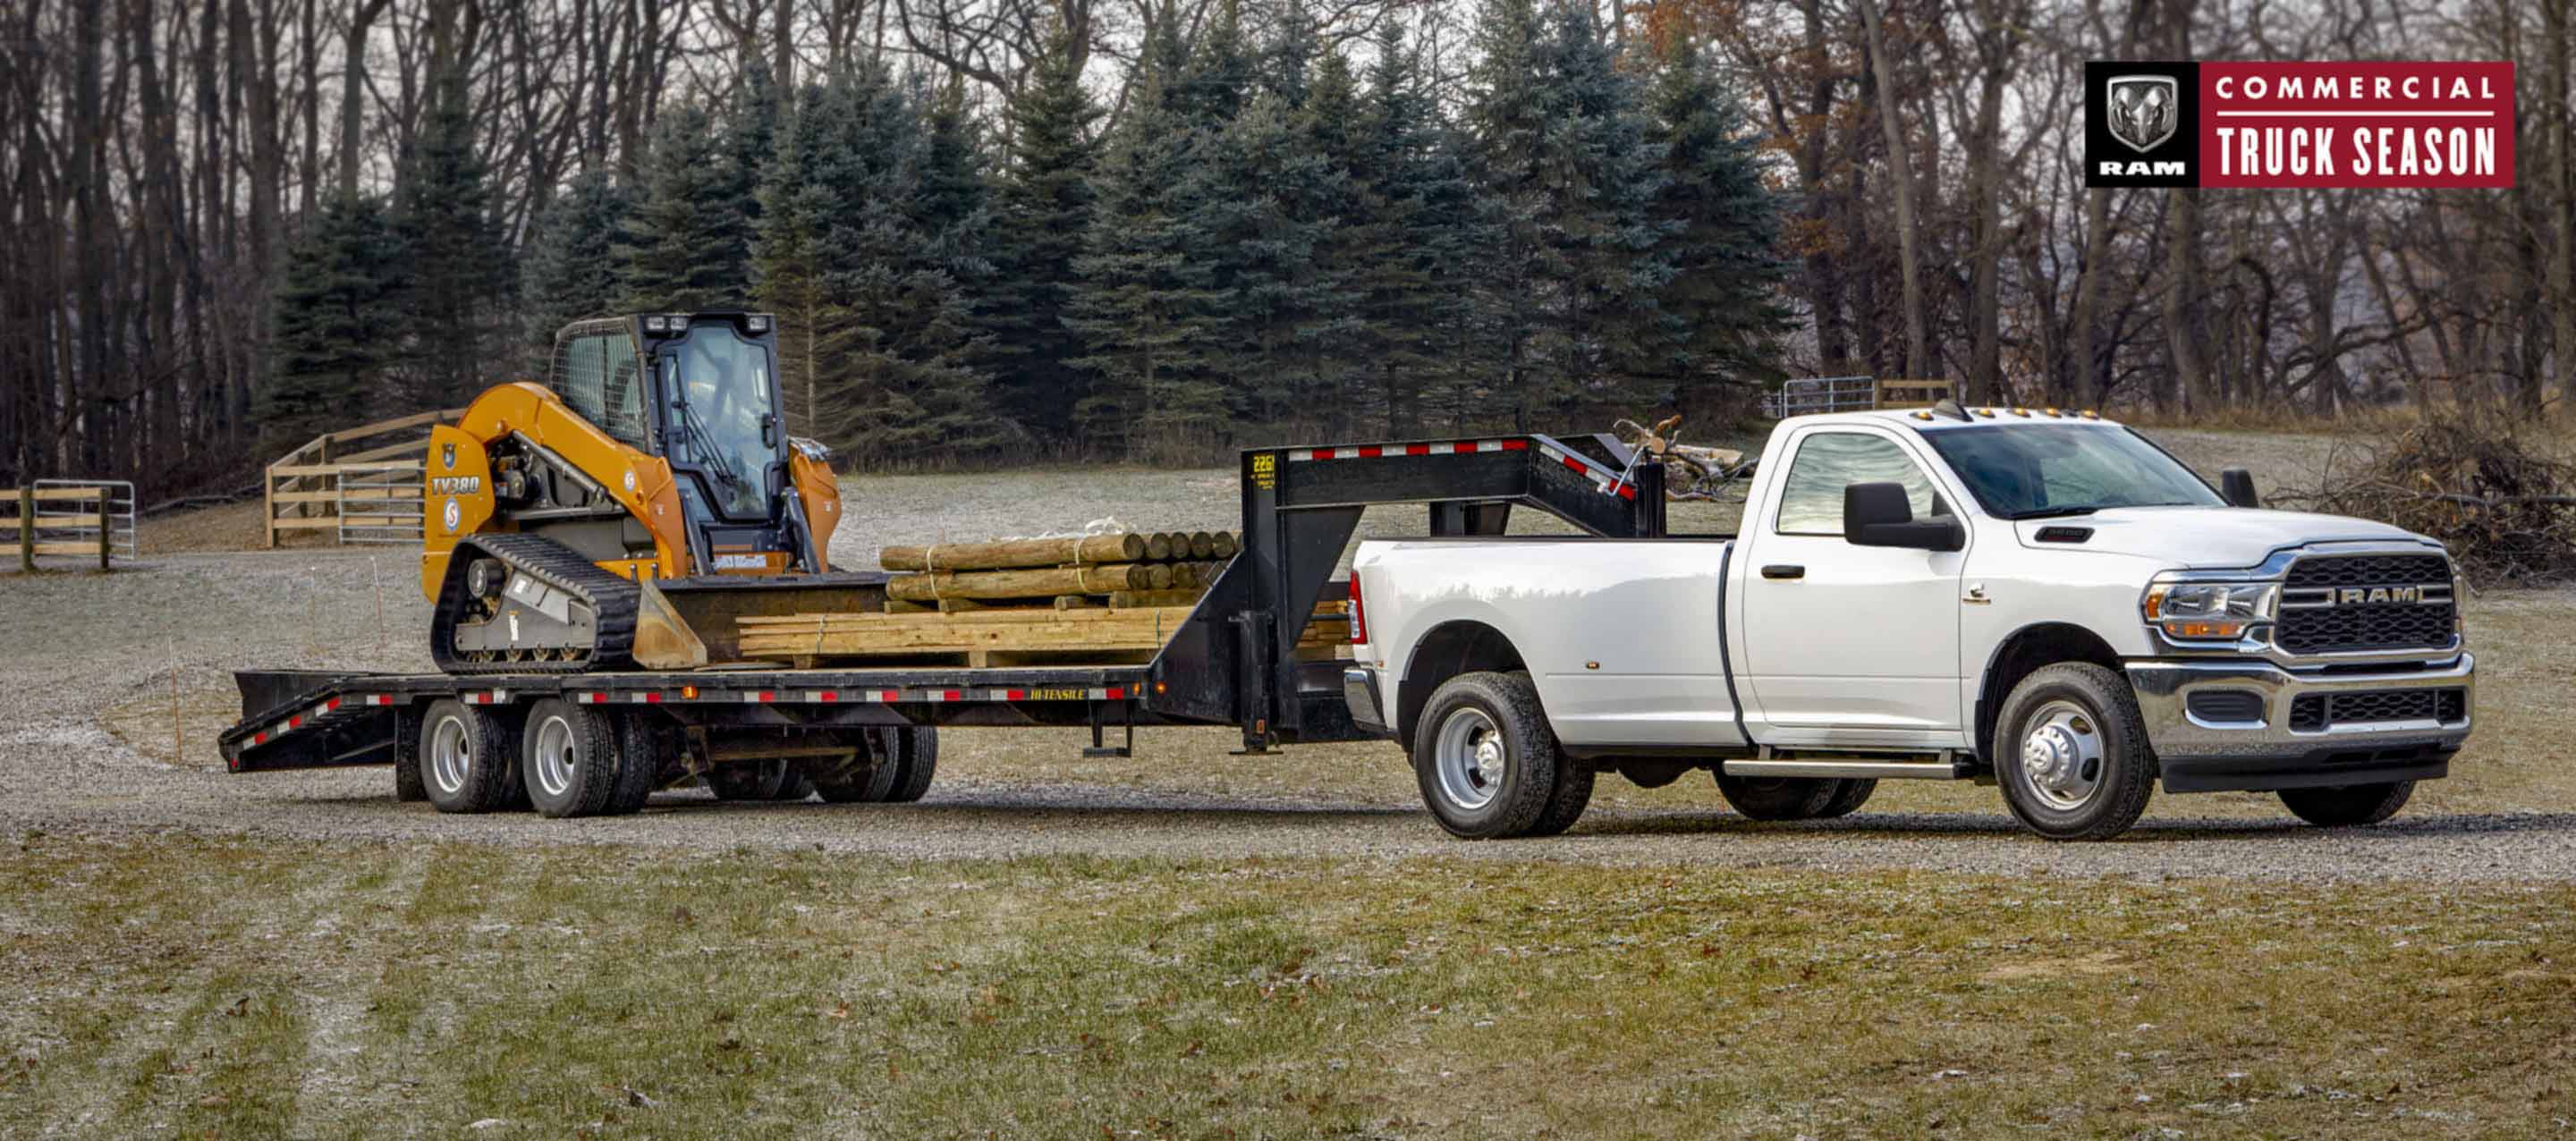 A white 2023 Ram 3500 Tradesman 4x4 Regular Cab towing a fifth wheel flatbed trailer loaded with lumber. Ram Commercial Truck Season. 